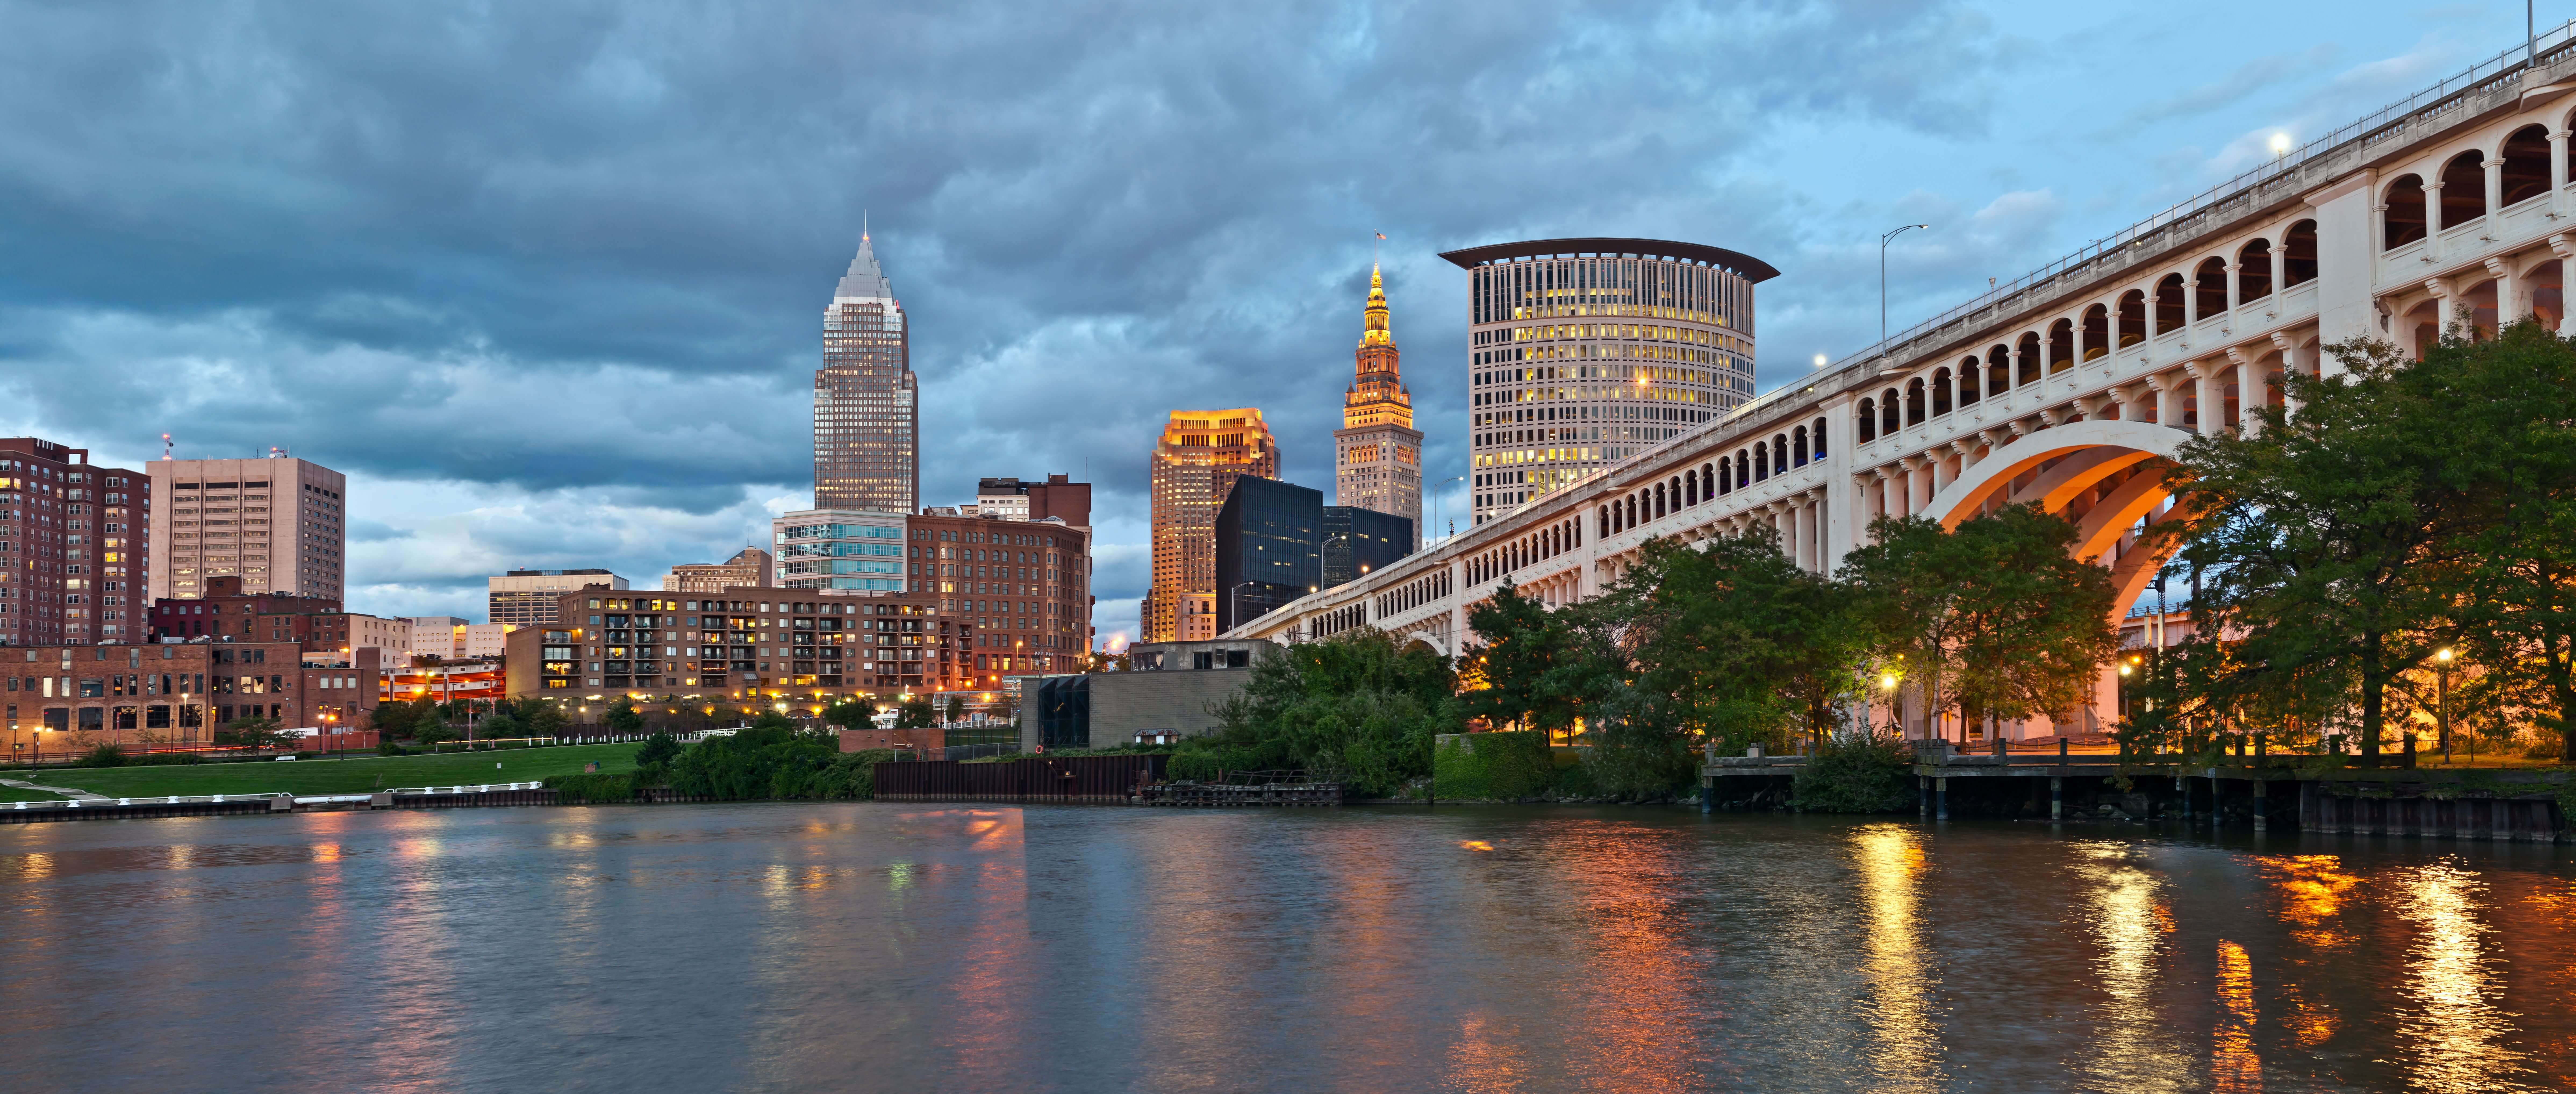 image of ohio on our online chiropractic continuing education page